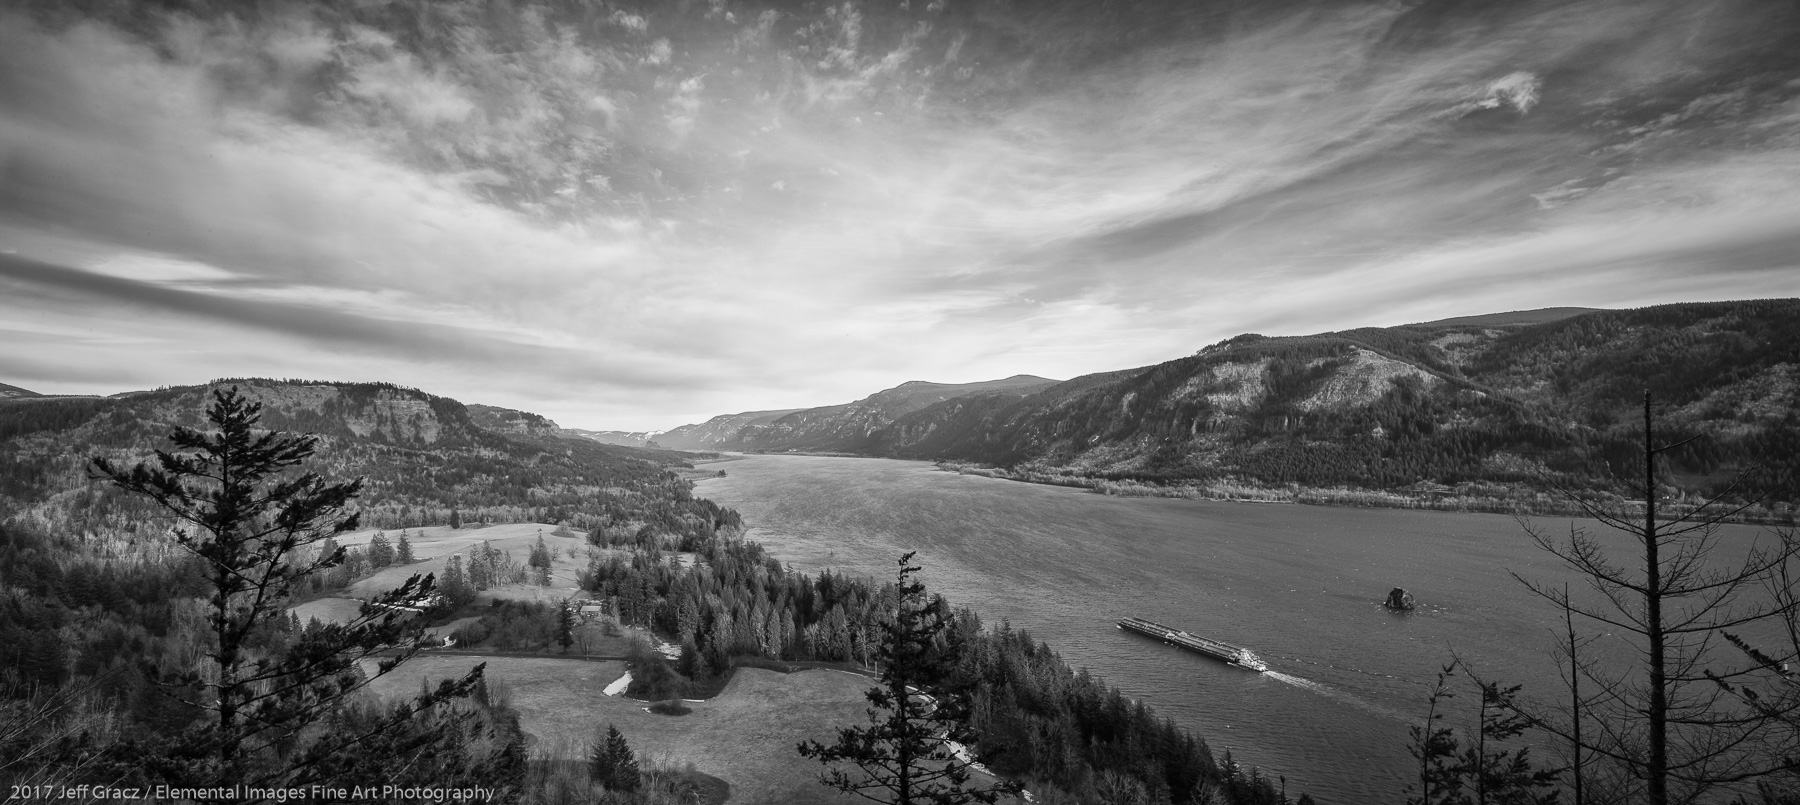 The Columbia River Gorge | Columbia River Gorge National Scenic Area | WA | USA - © 2017 Jeff Gracz / Elemental Images Fine Art Photography - All Rights Reserved Worldwide